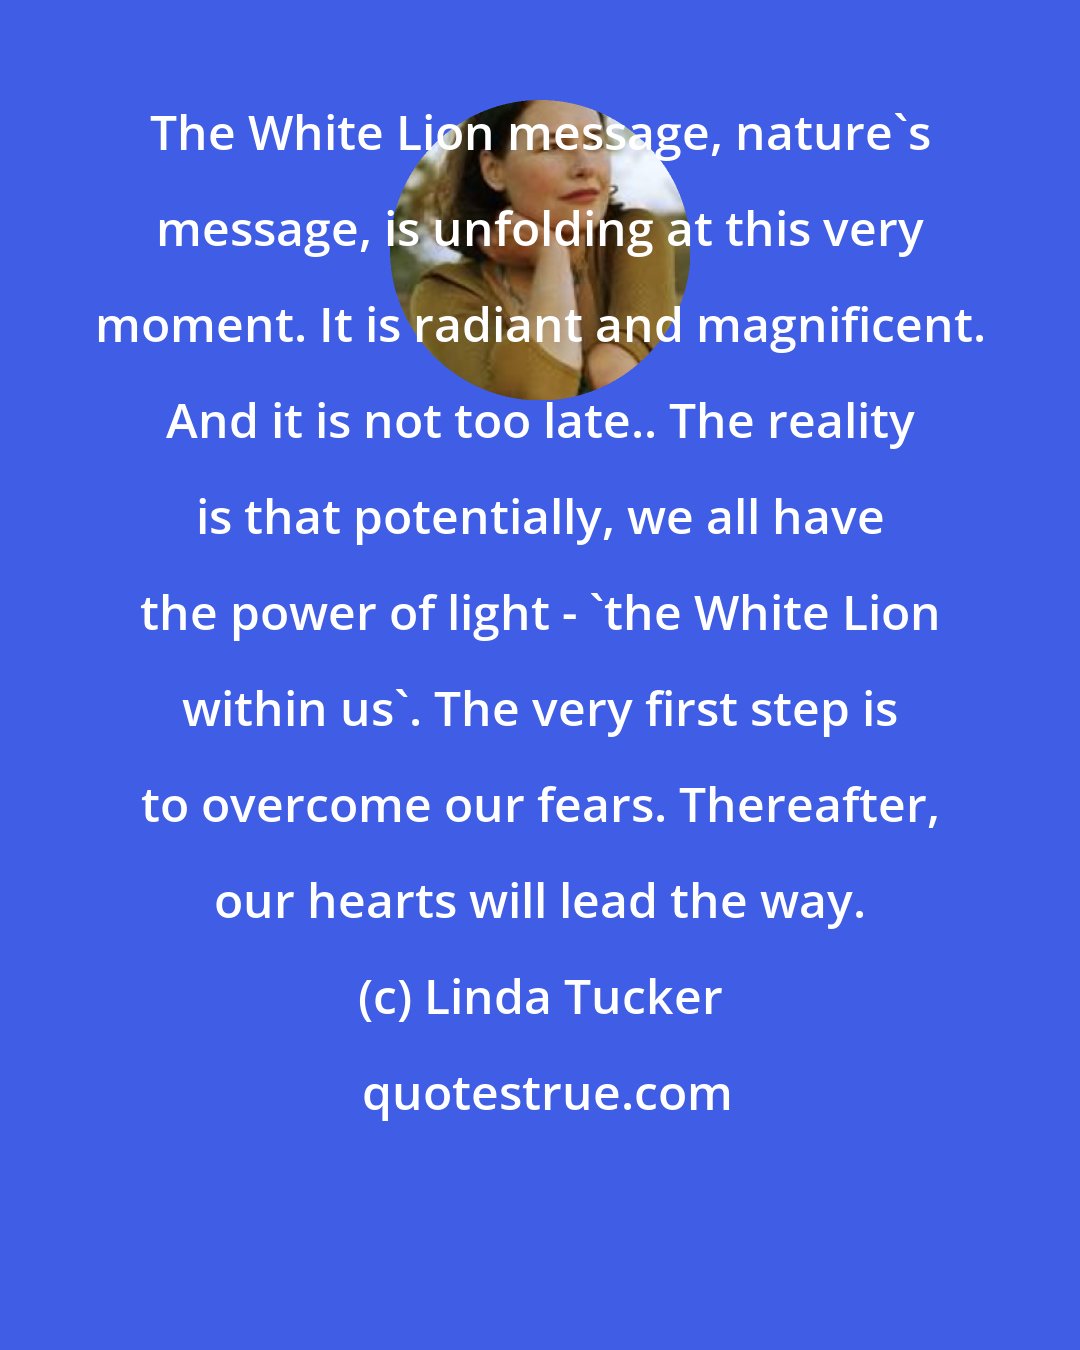 Linda Tucker: The White Lion message, nature's message, is unfolding at this very moment. It is radiant and magnificent. And it is not too late.. The reality is that potentially, we all have the power of light - 'the White Lion within us'. The very first step is to overcome our fears. Thereafter, our hearts will lead the way.